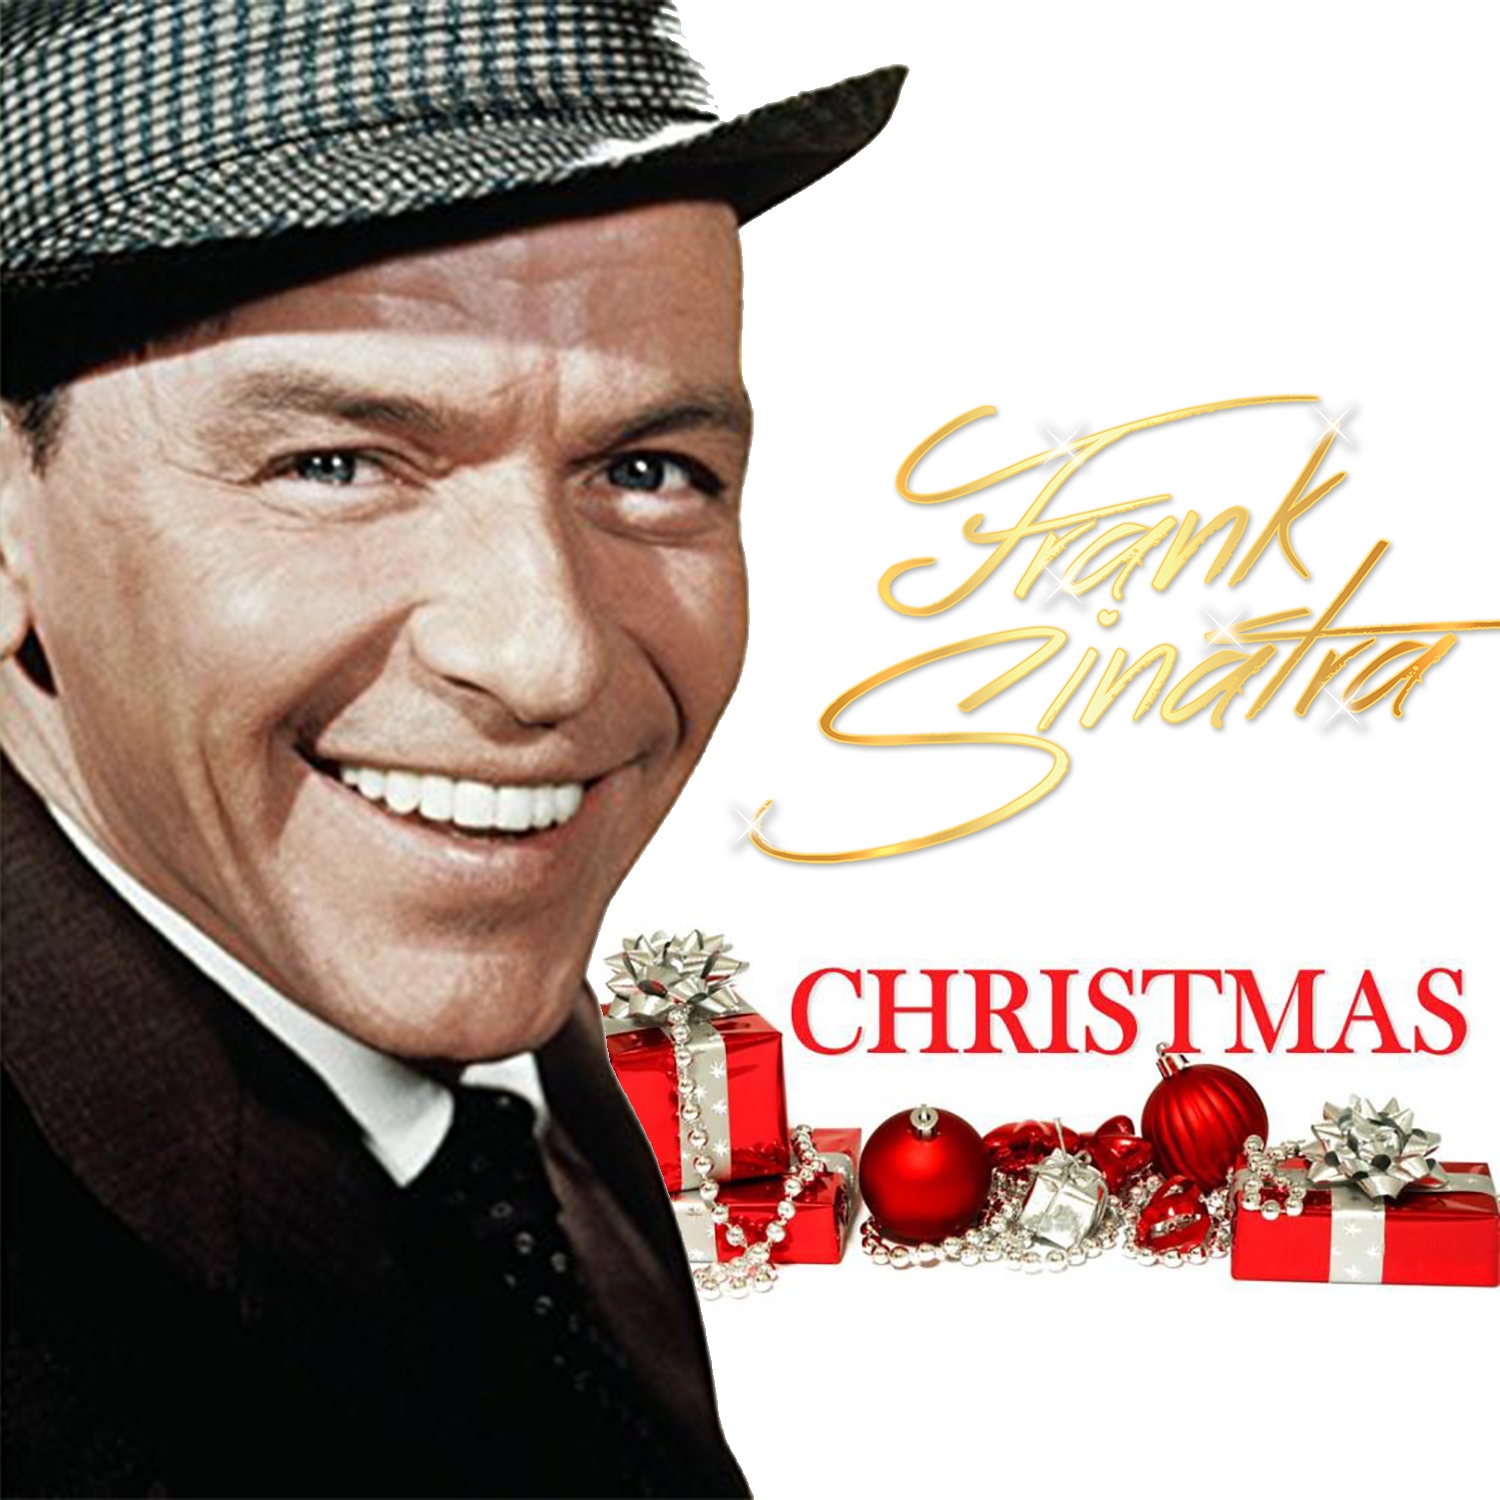 Christmas (The Best Christmas Song by Sinatra)